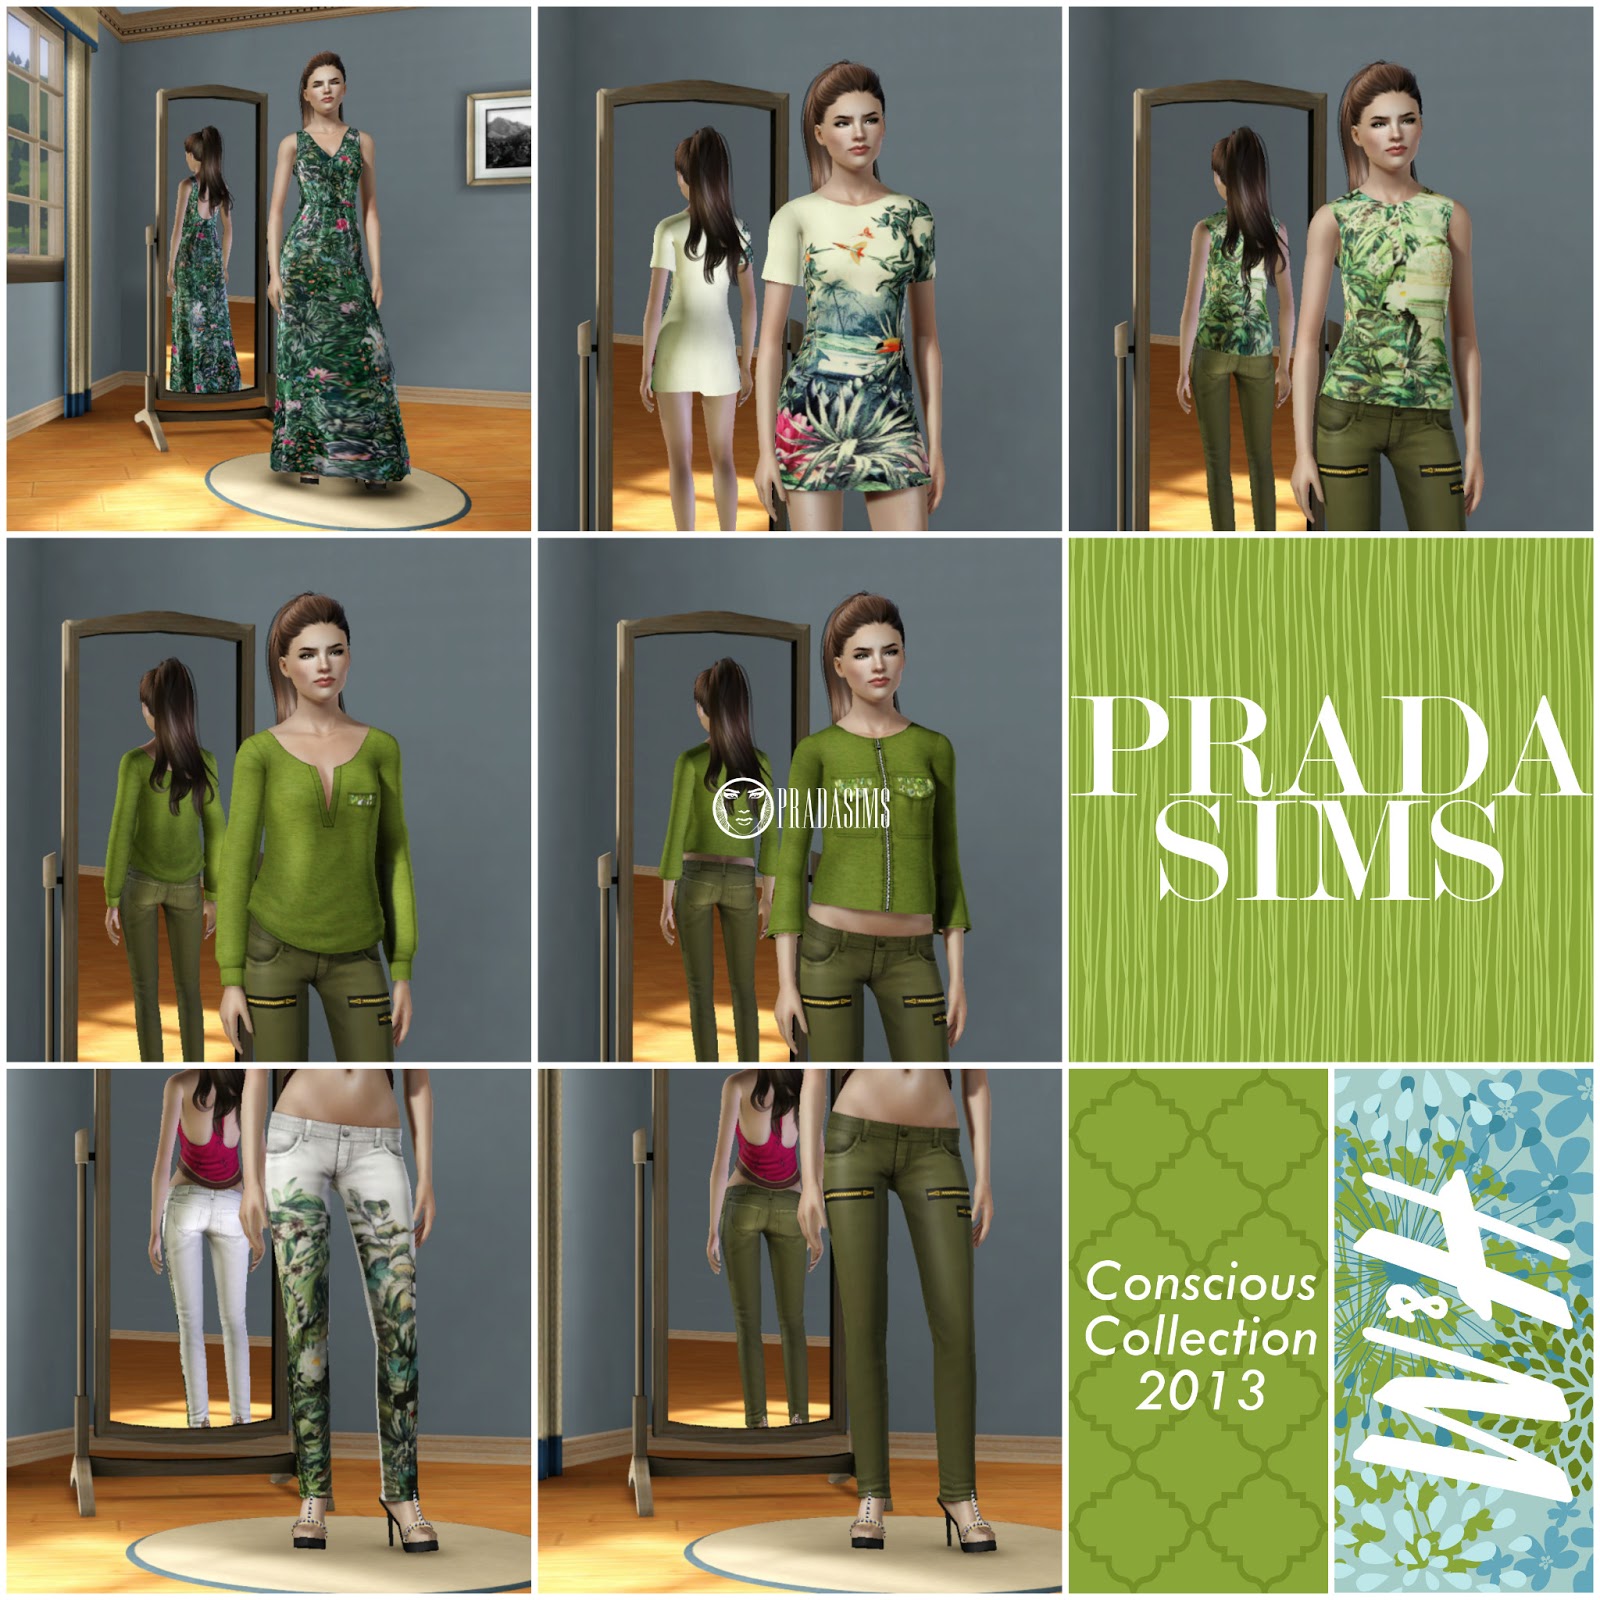 Collections collections 2013